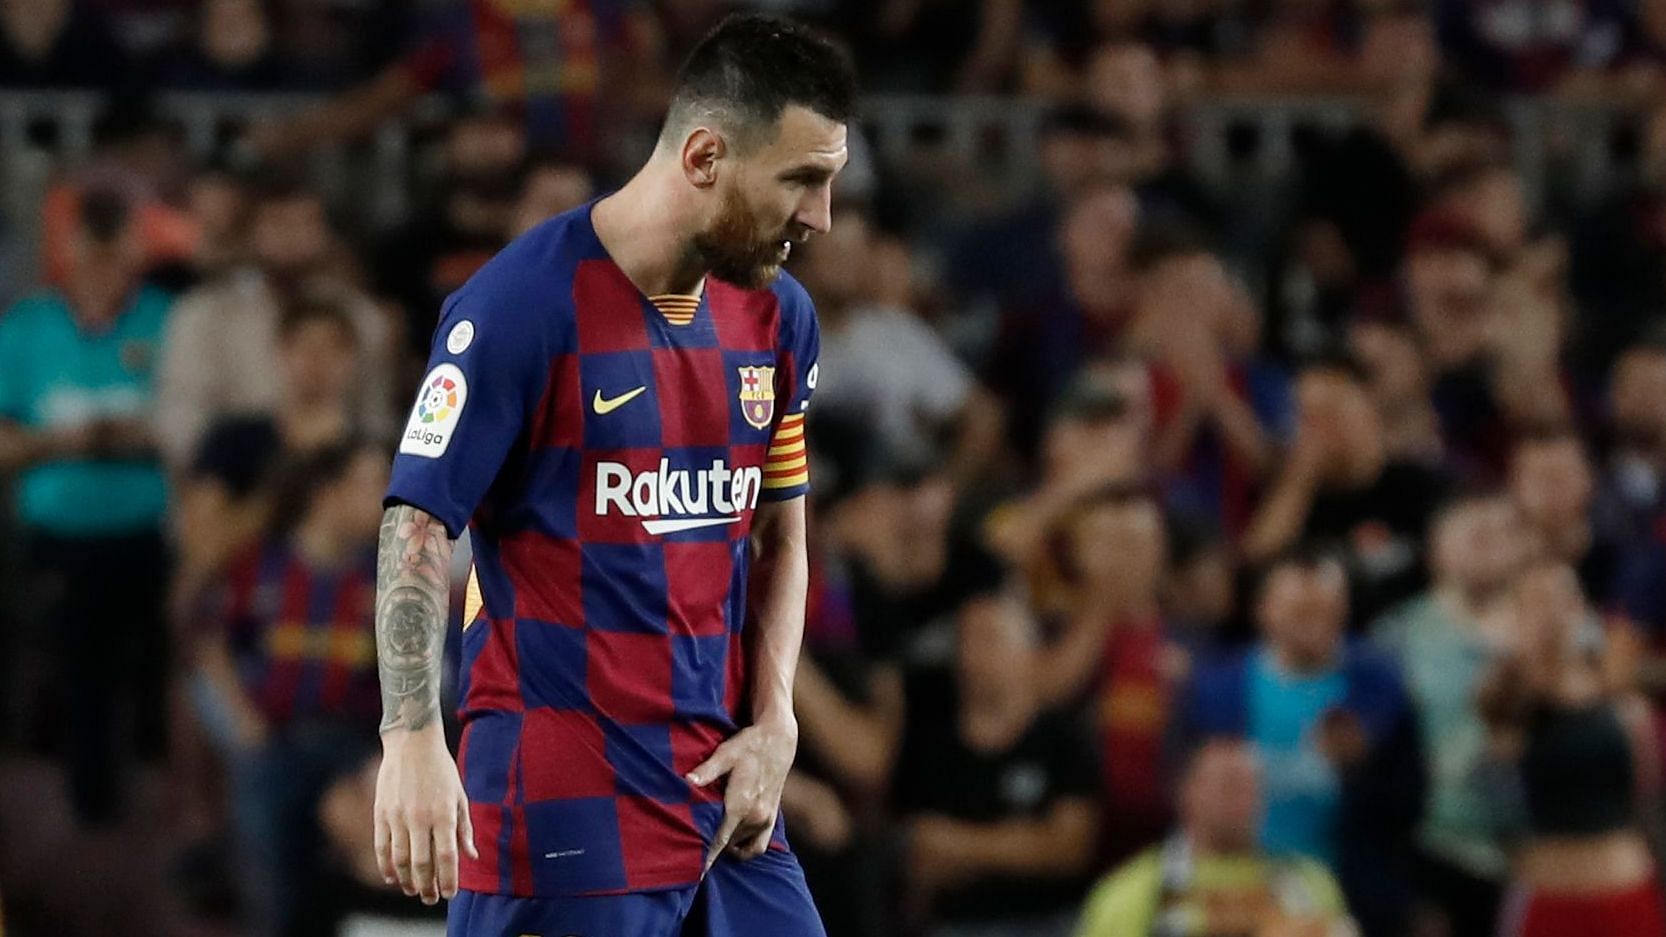 Lionel Messi had to be replaced at halftime of his first start after a long injury layoff.